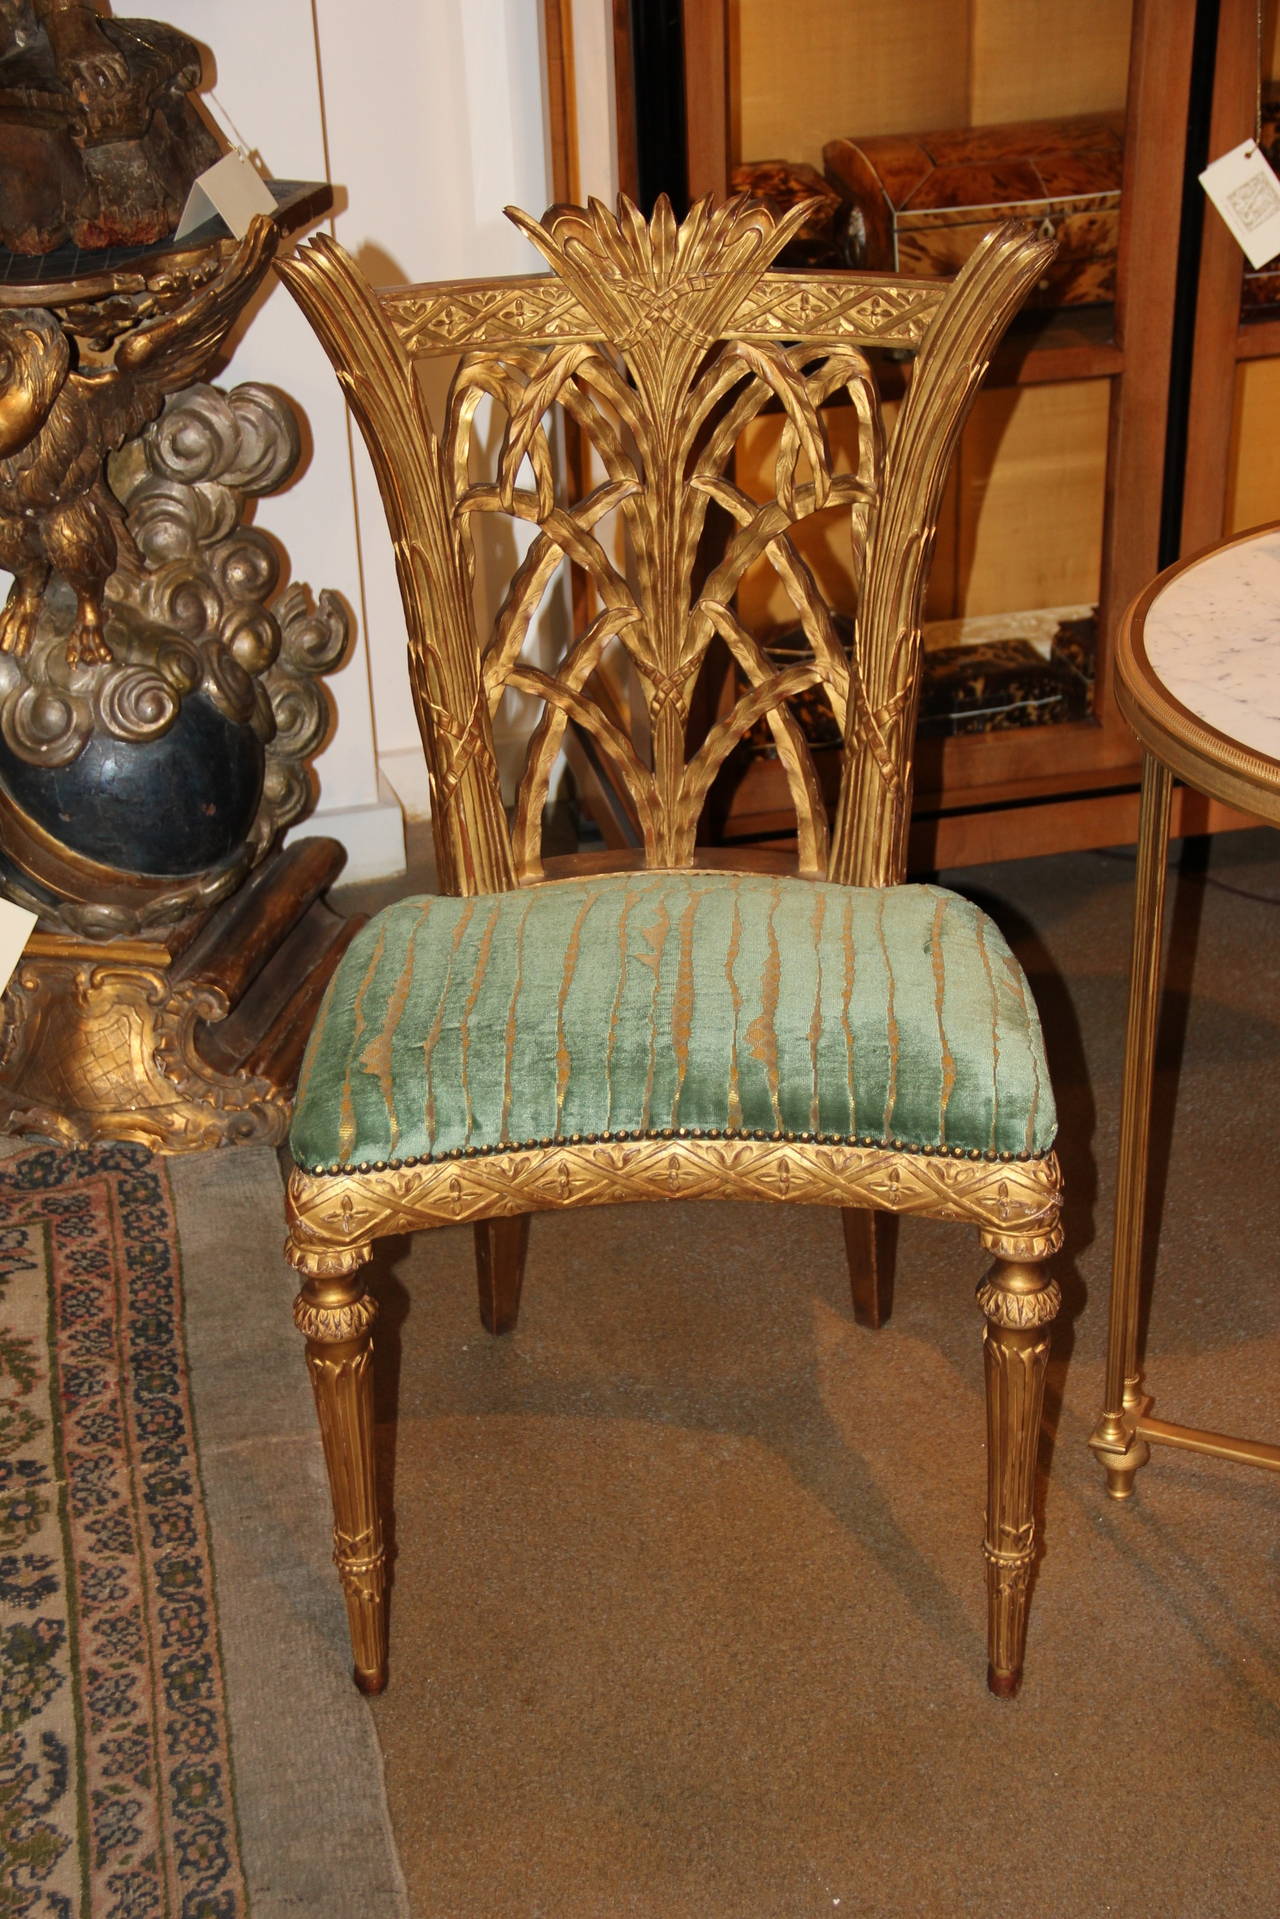 Rare Pair of Late 18th Century English Giltwood Side Chairs For Sale 3